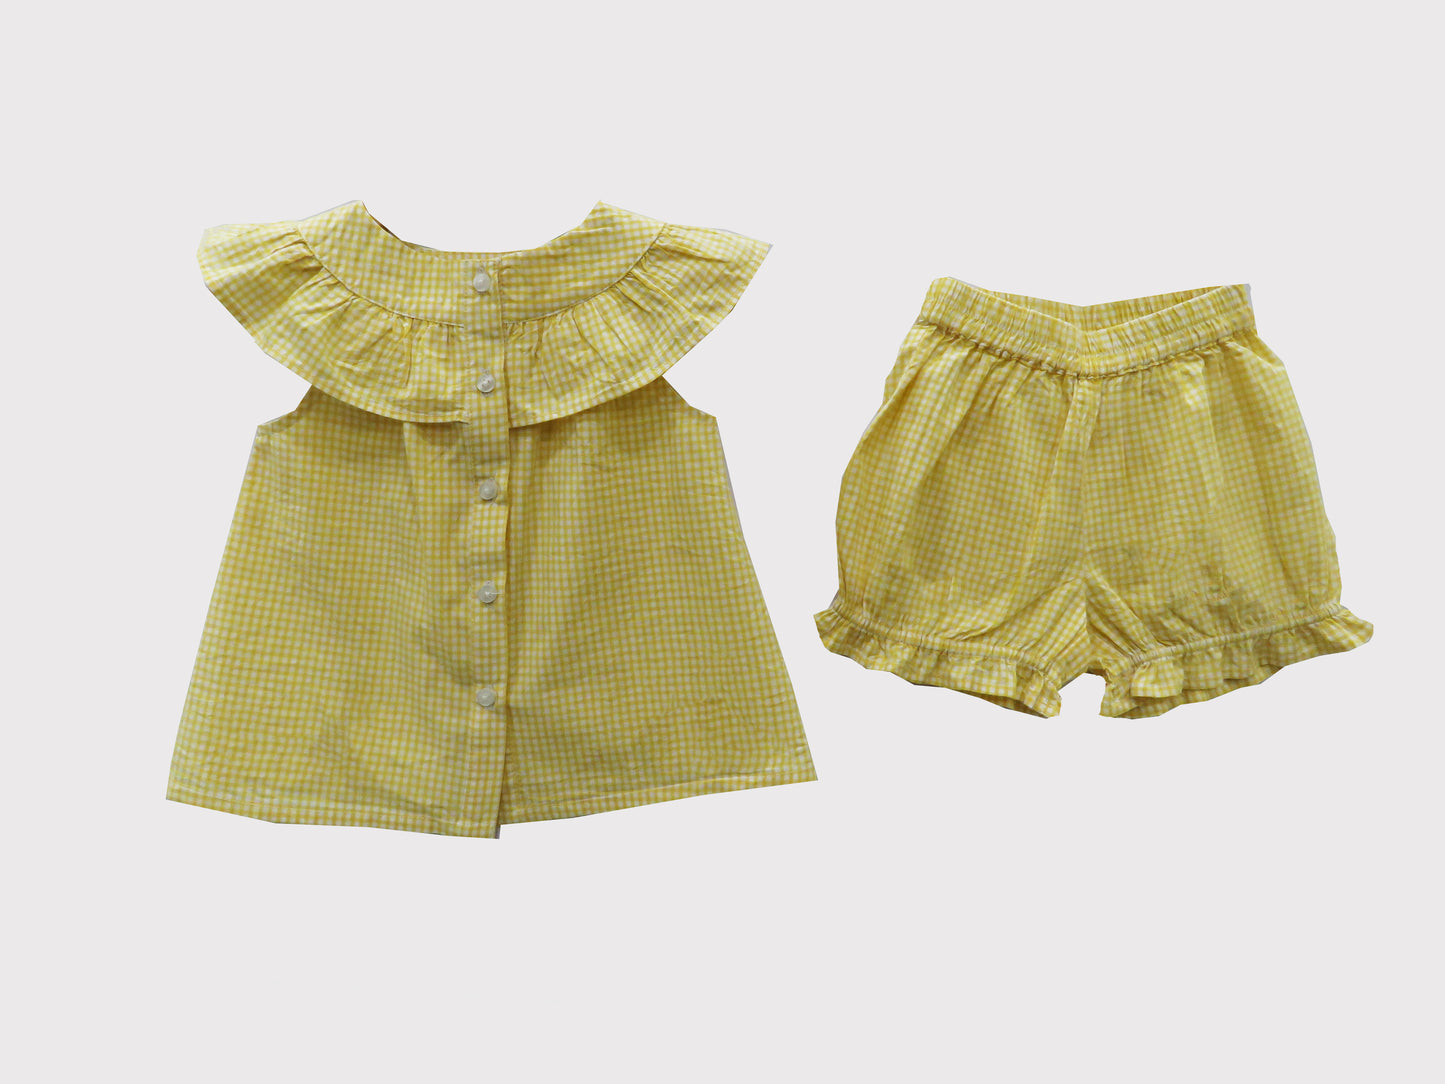 CUTE YELLOW NIGHTSUIT SET WITH FRILLS